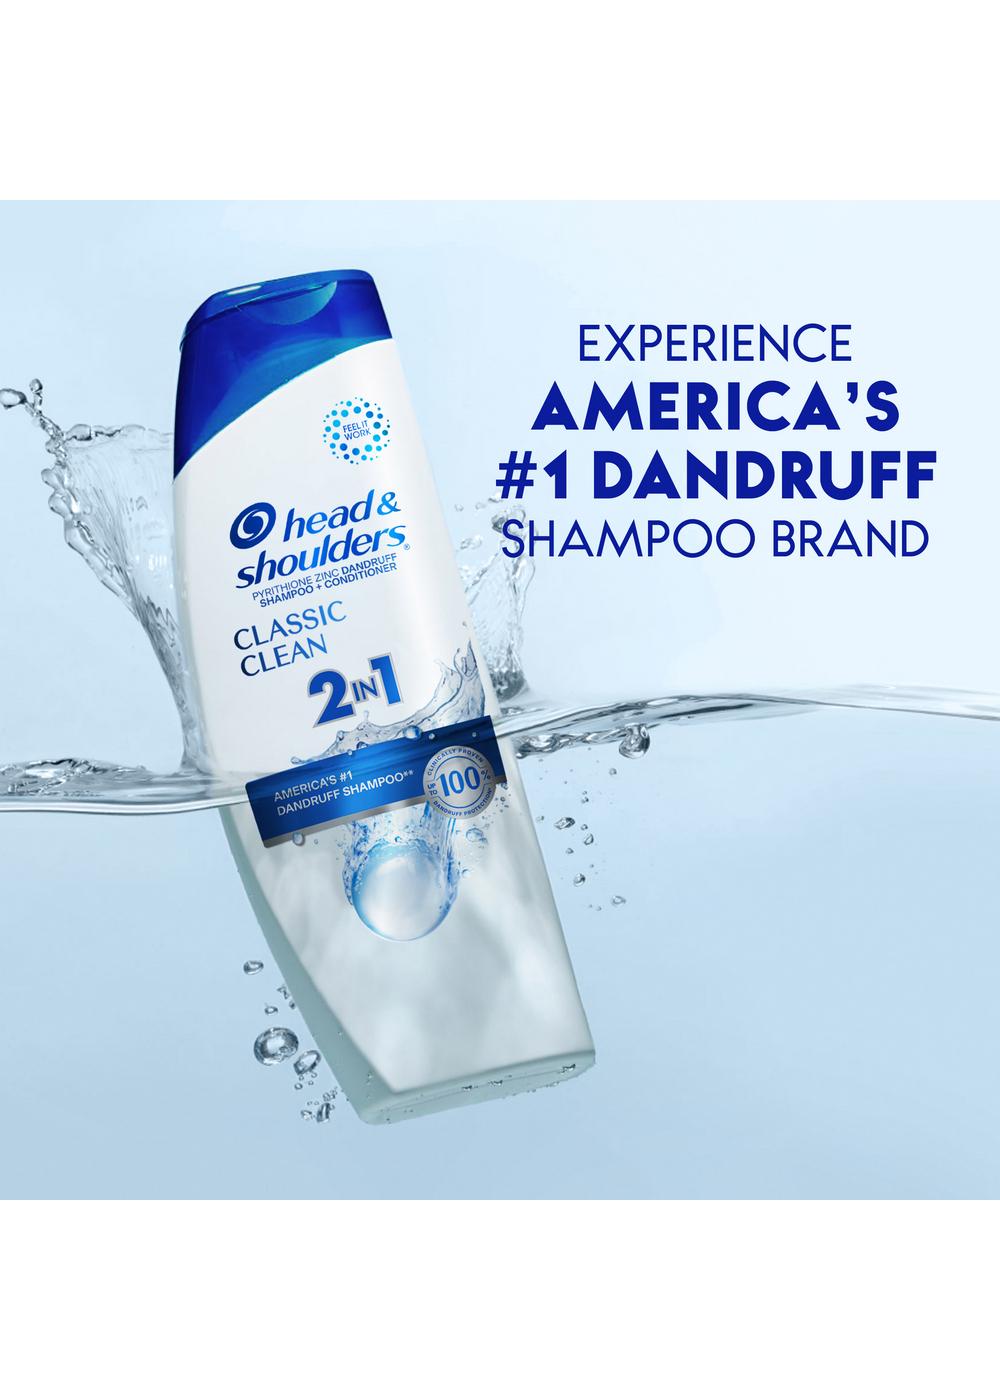 Head & Shoulders 2 in 1 Dandruff Shampoo + Conditioner - Classic Clean; image 11 of 11